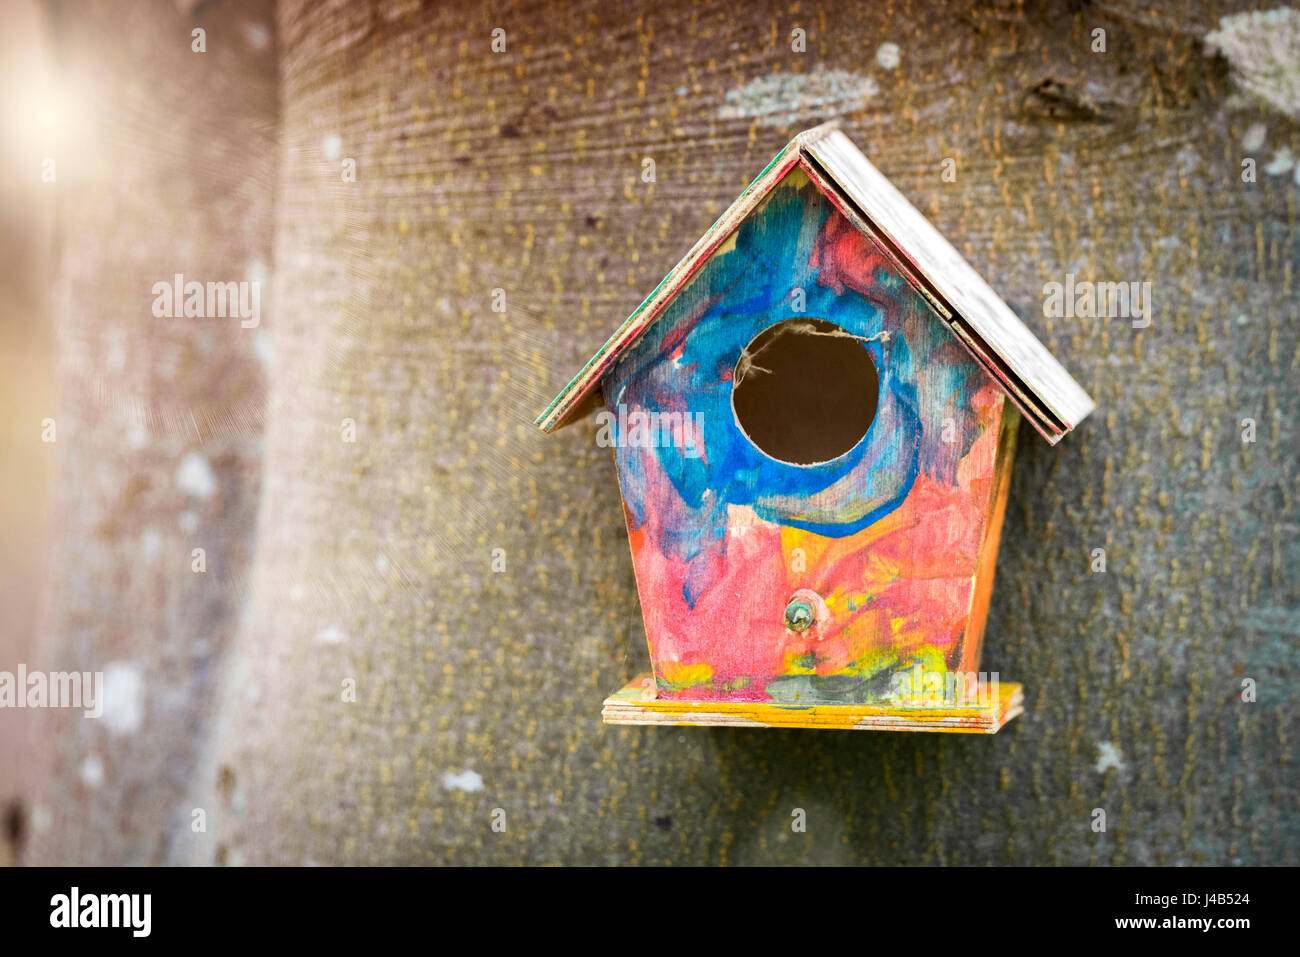 Colorful bird house in childish colors hanging on a tree in a garden in the spring Stock Photo